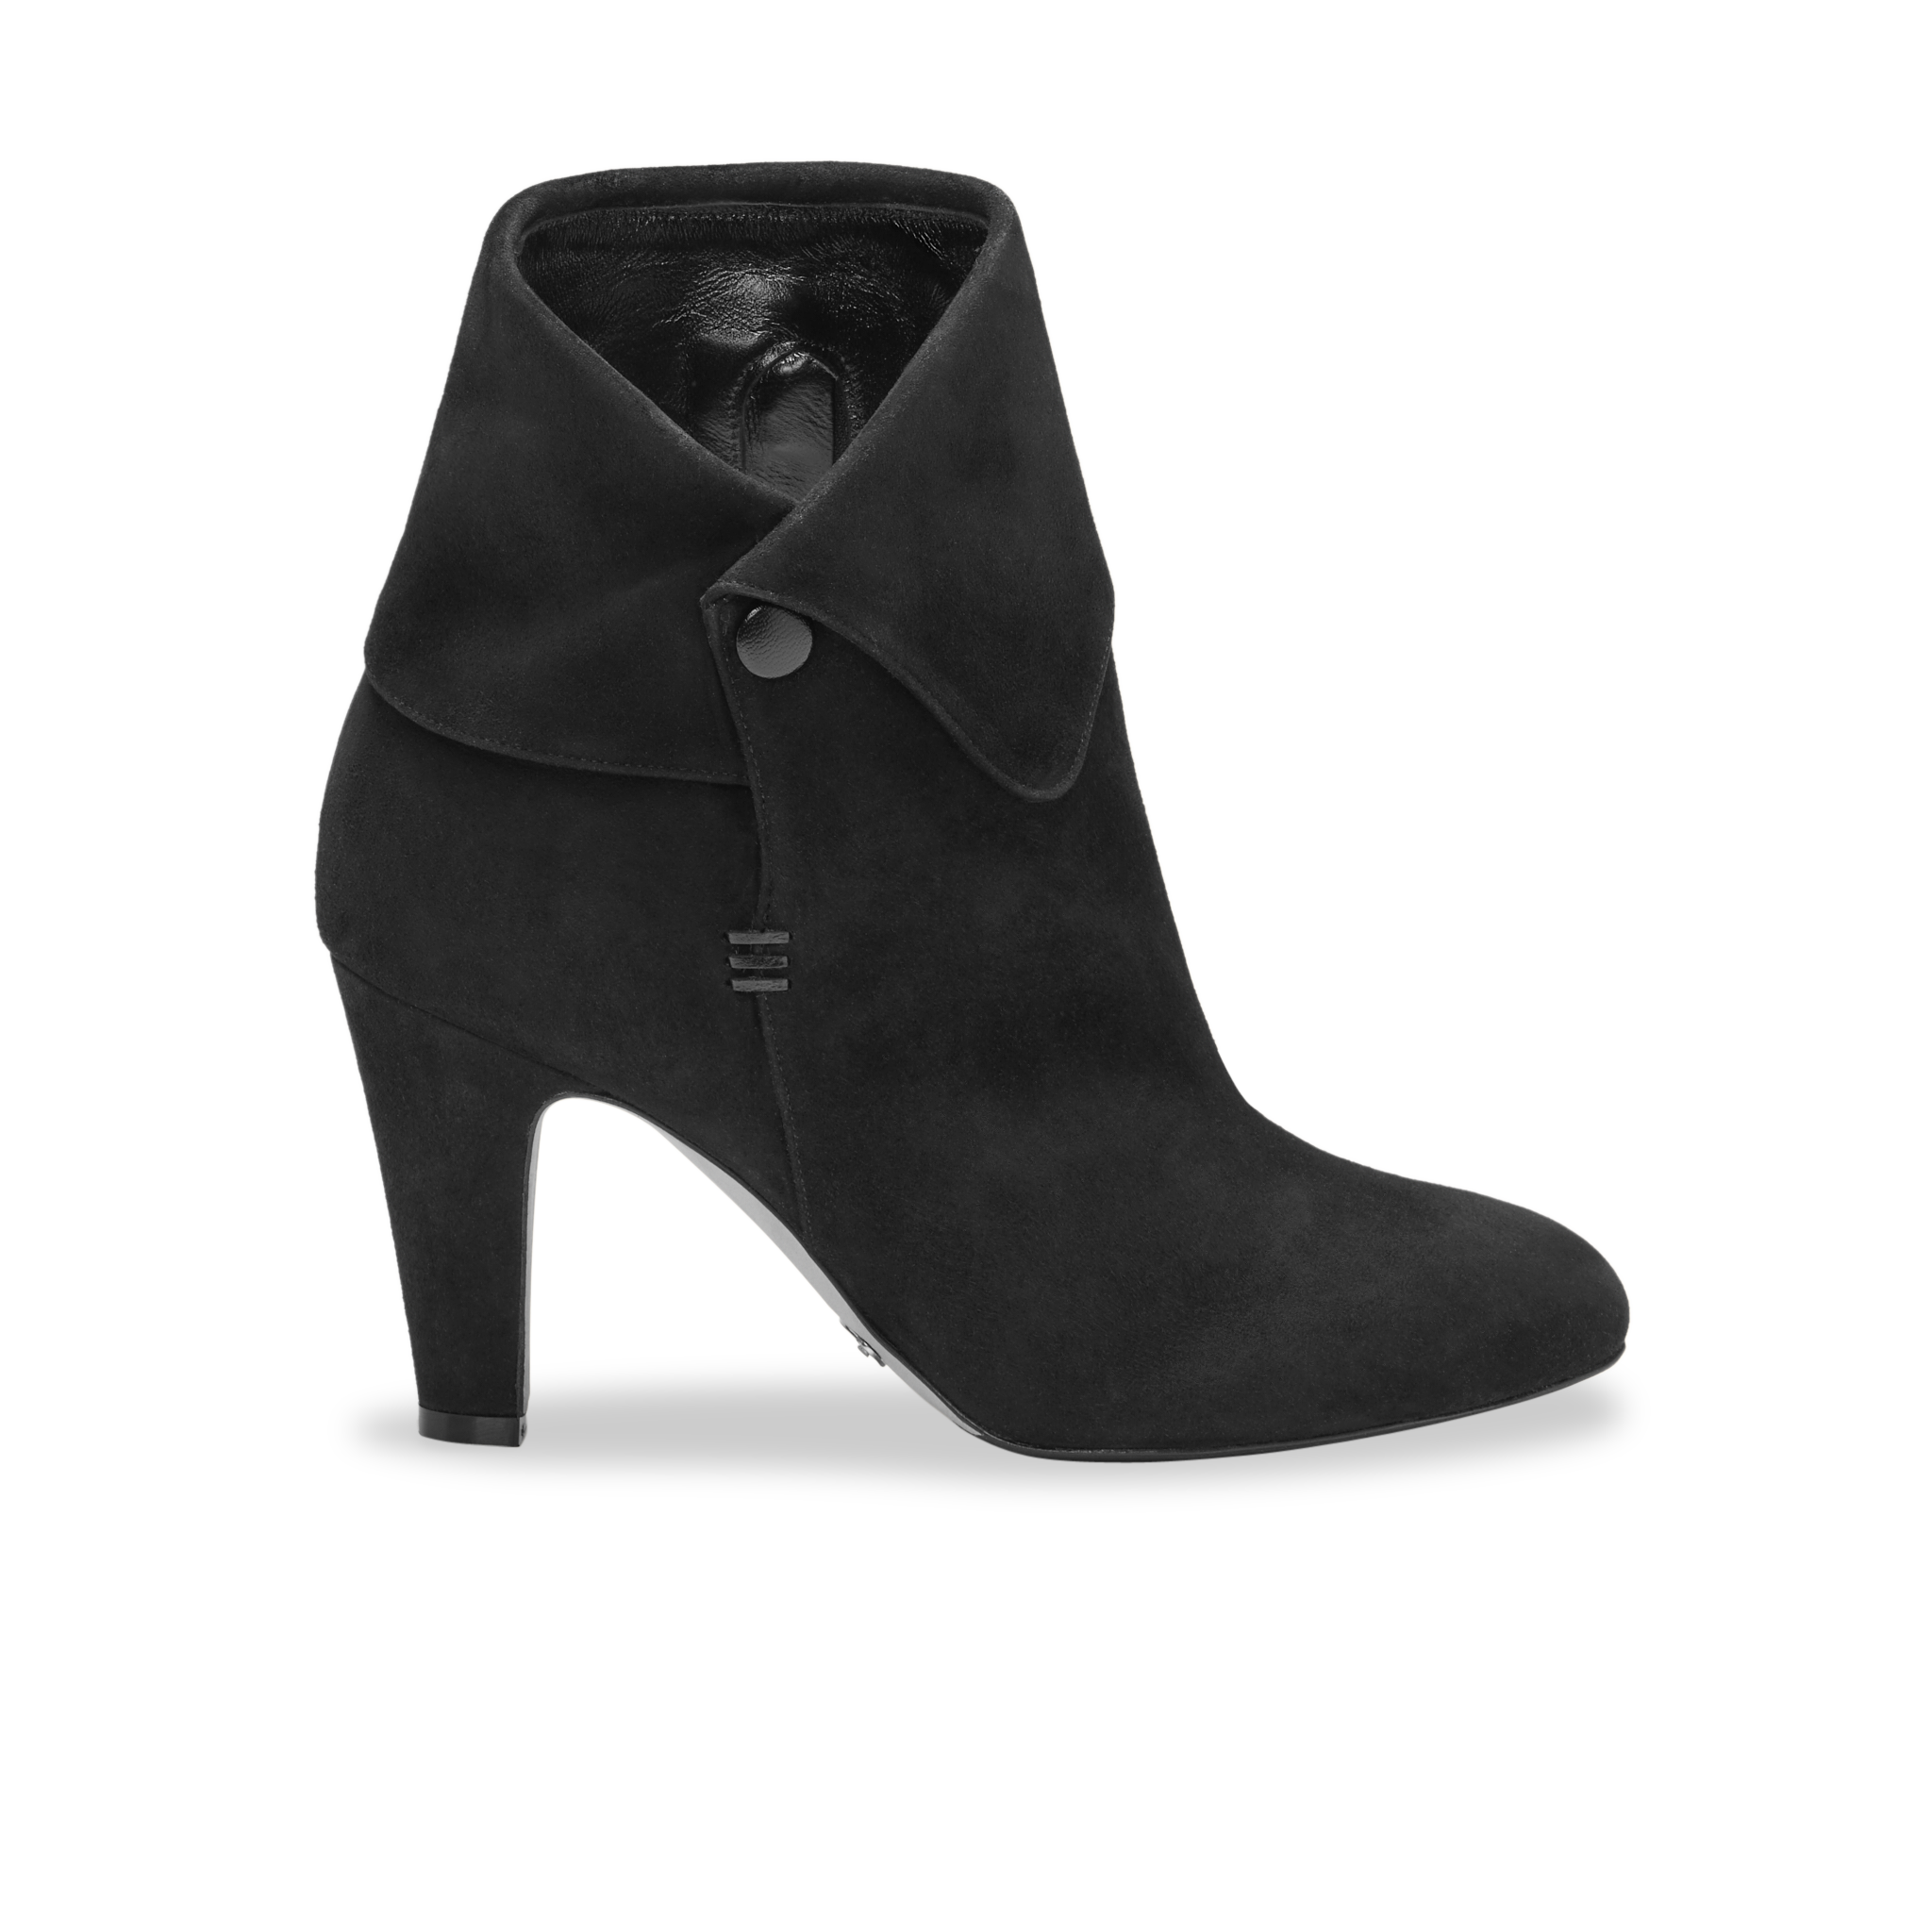 KaLI_store Womens Boots Womens Ankle Boots Side Zipper Ankle Booties  Comfortable Outdoor Shoes Black,6.5 - Walmart.com